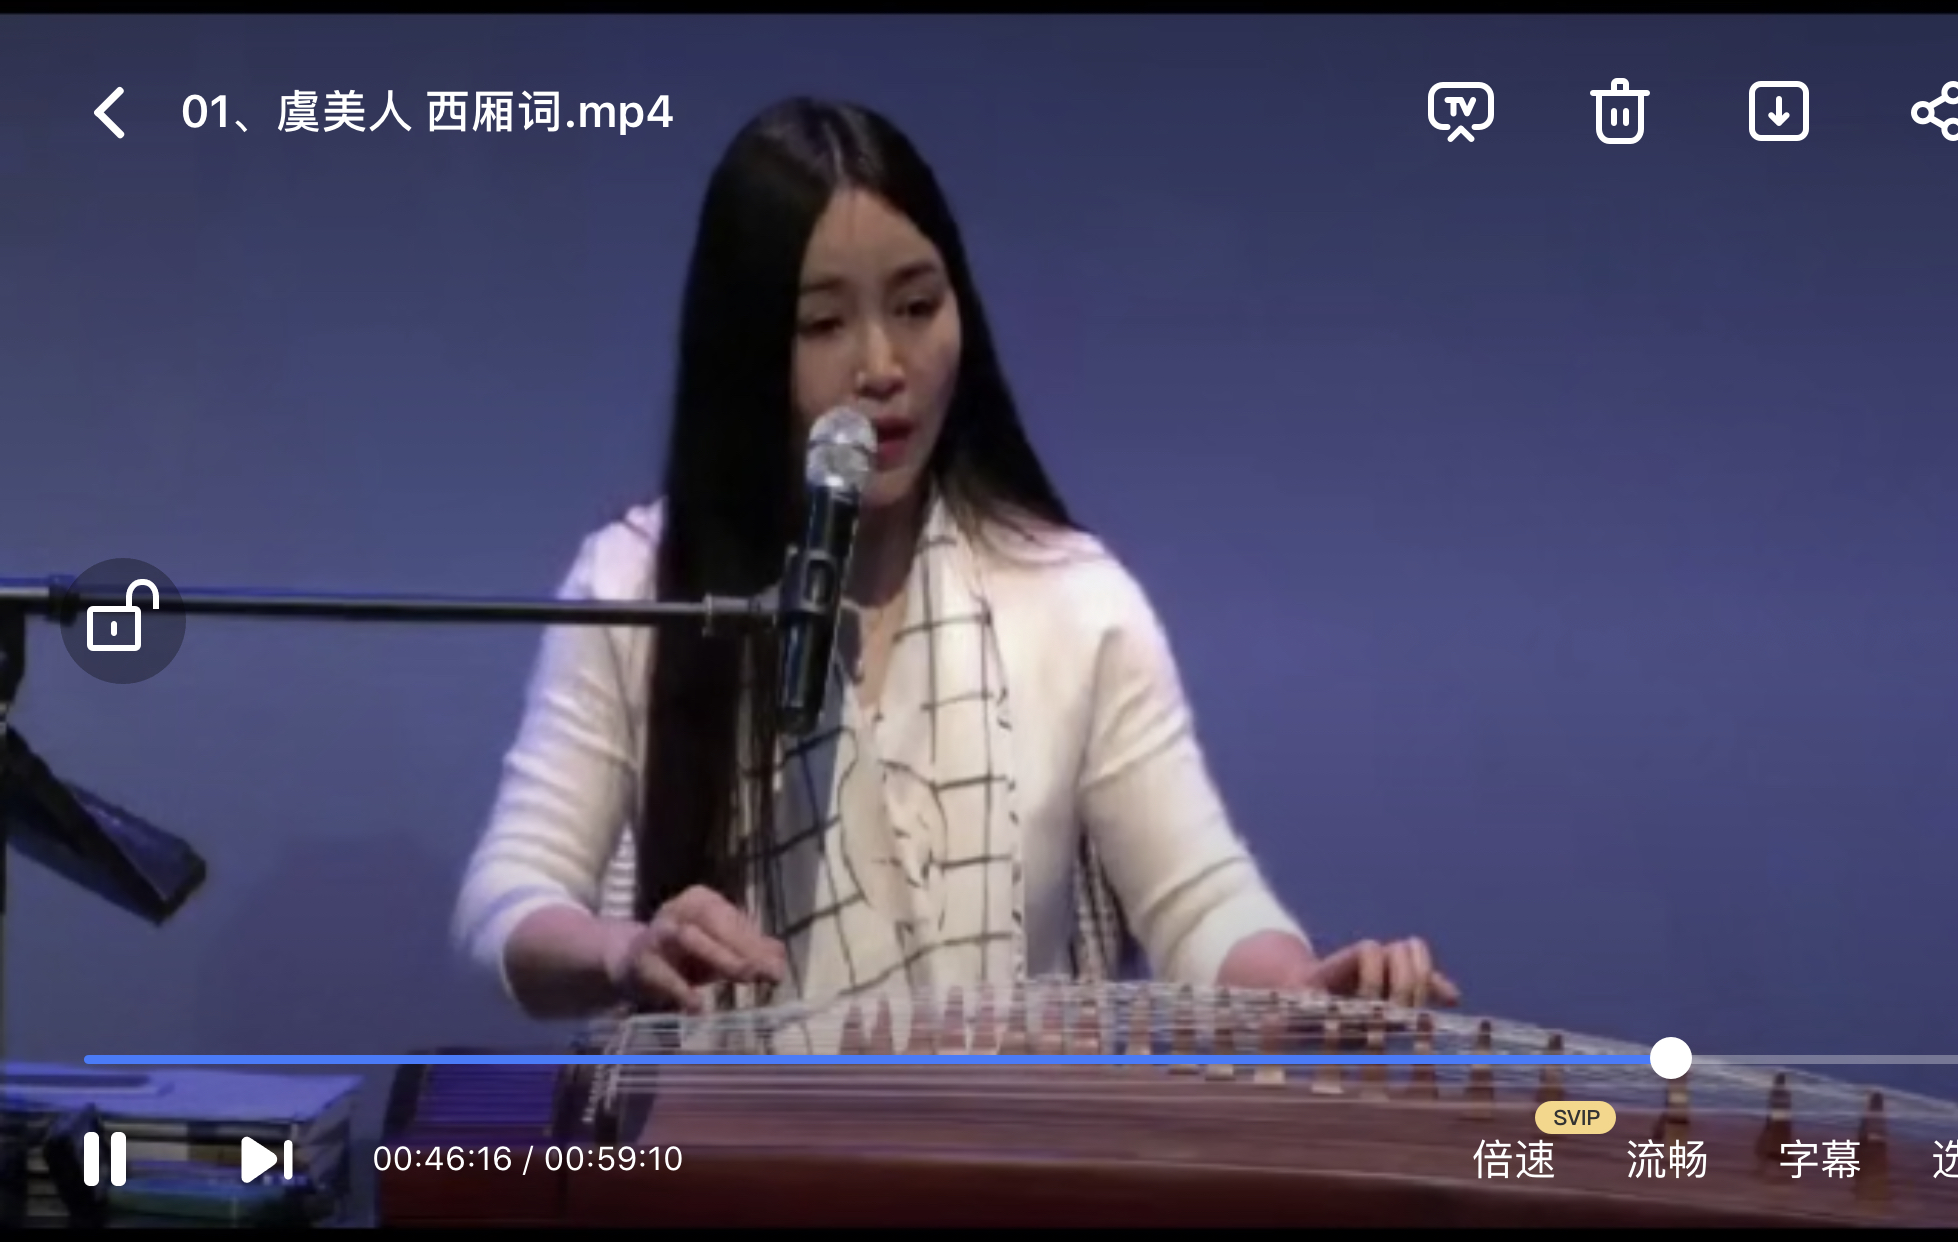 Video Tutorias for Zither Self-learning, Teach GuZheng by youself, for beginner and progressive